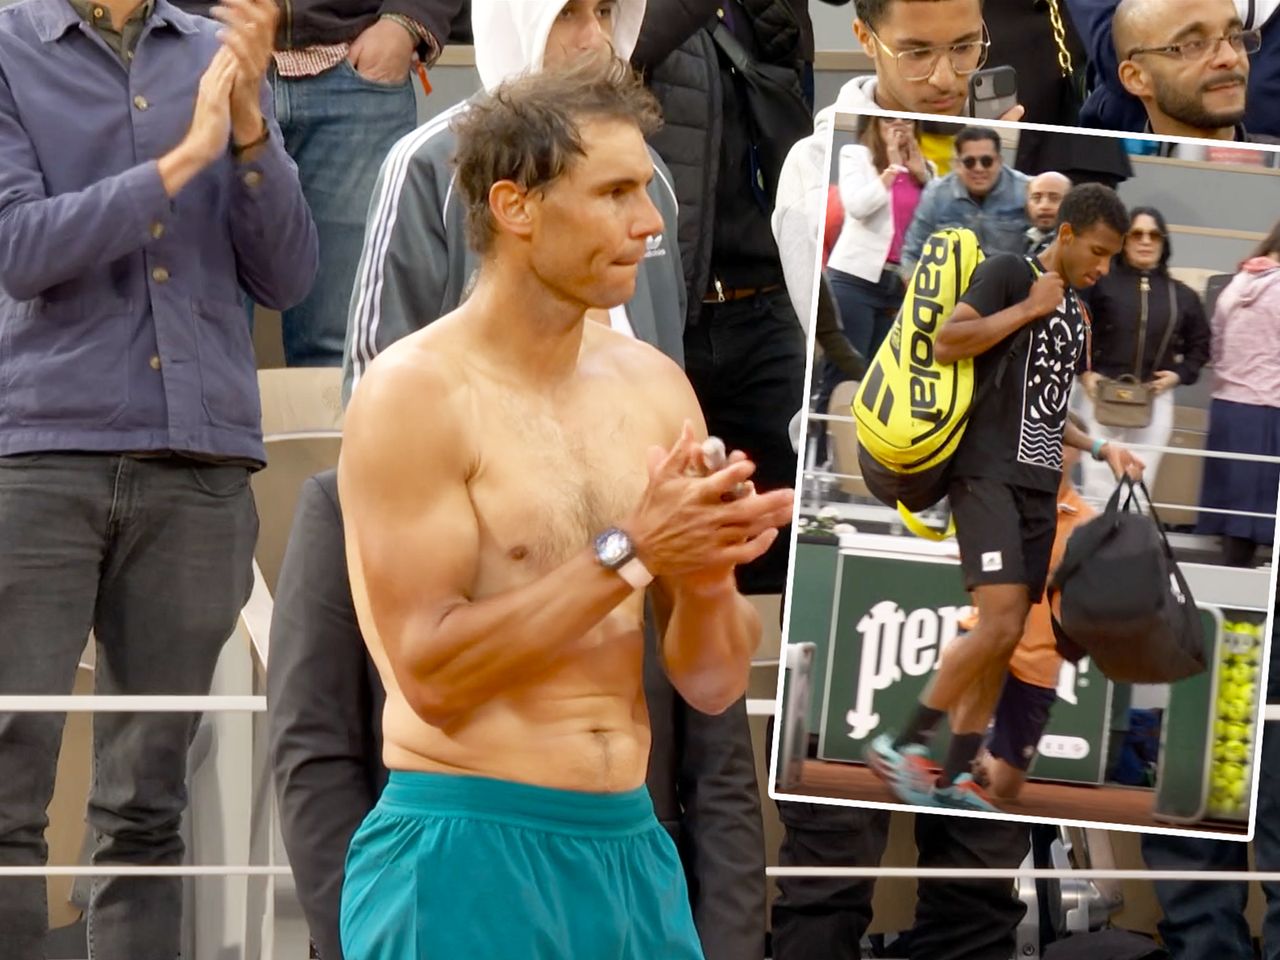 Rafael Nadal applauds Felix Auger-Aliassime off the court in classy gesture after epic French Open match - Tennis video